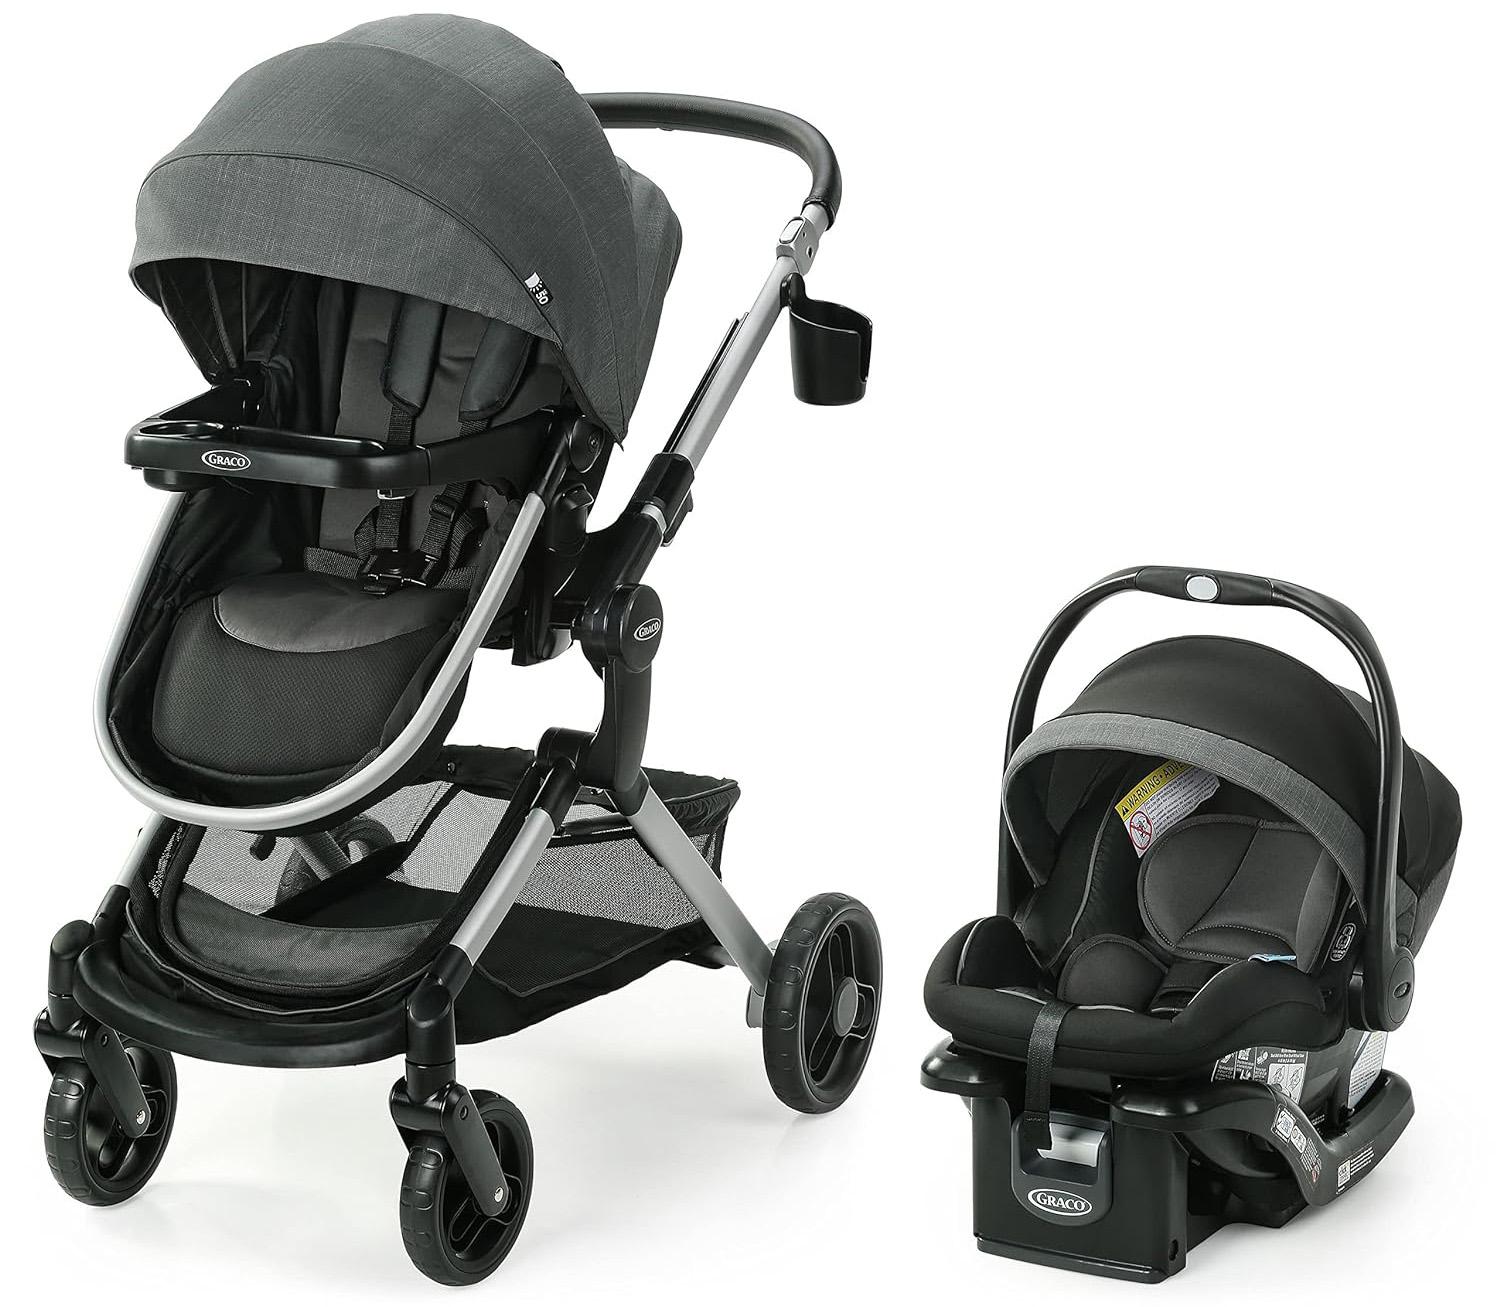 Graco Modes Next Travel System SnugRide 35 Car Seat Baby Stroller for $279 Shipped